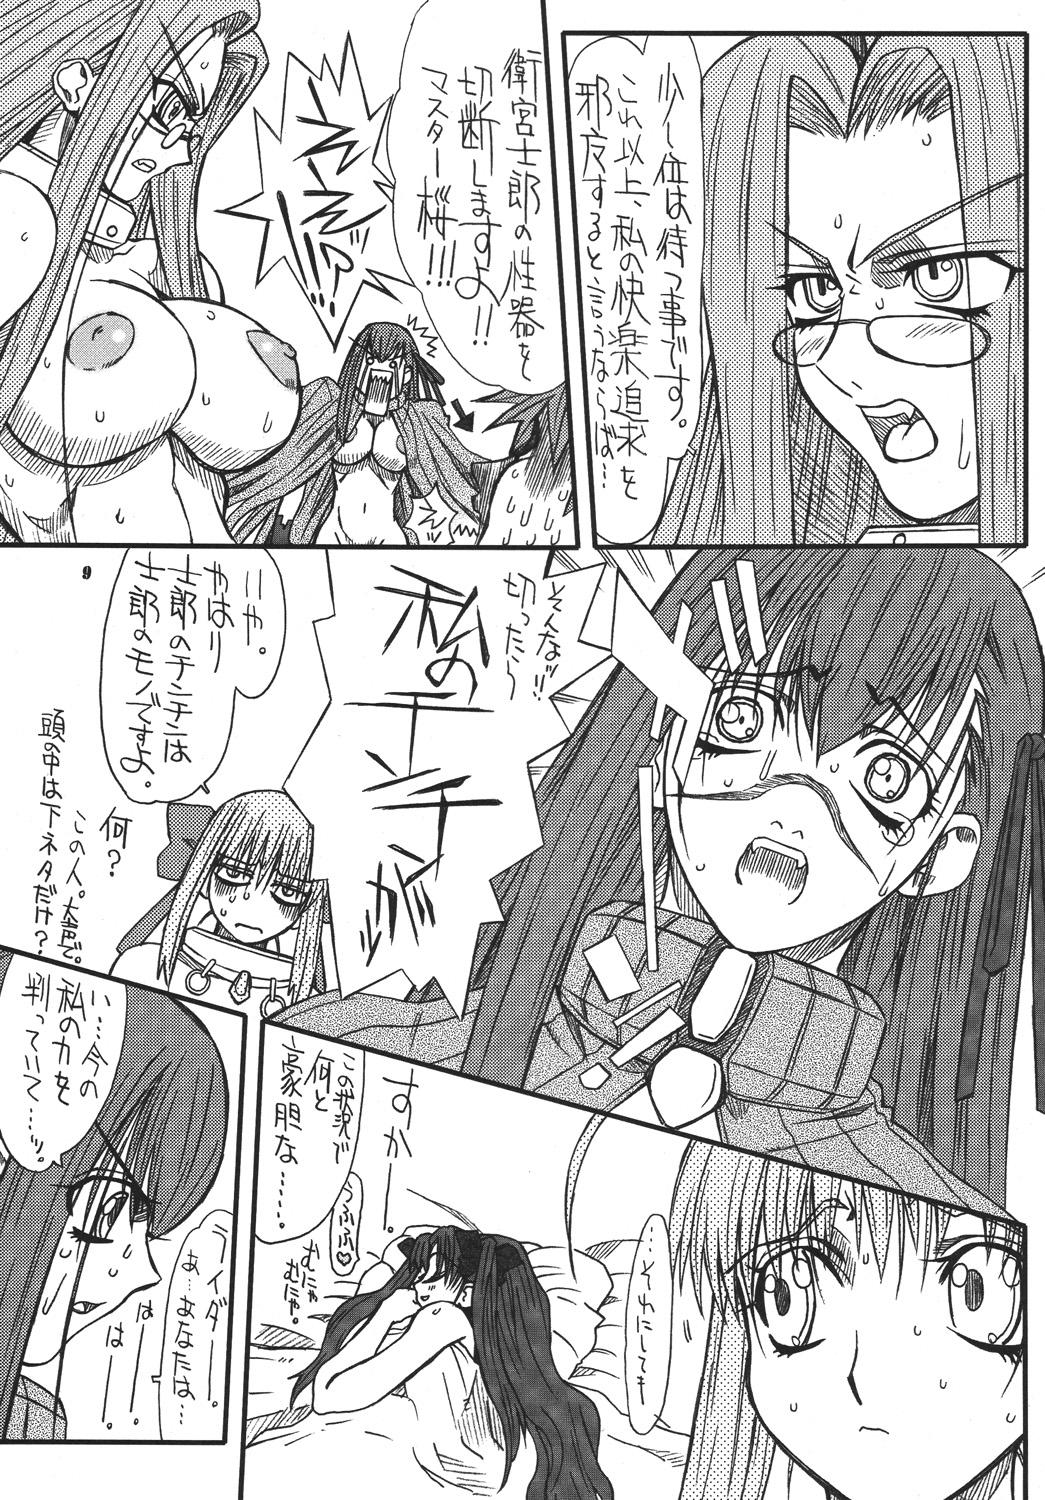 Jerkoff Akihime Yon - Fate stay night Flagra - Page 8